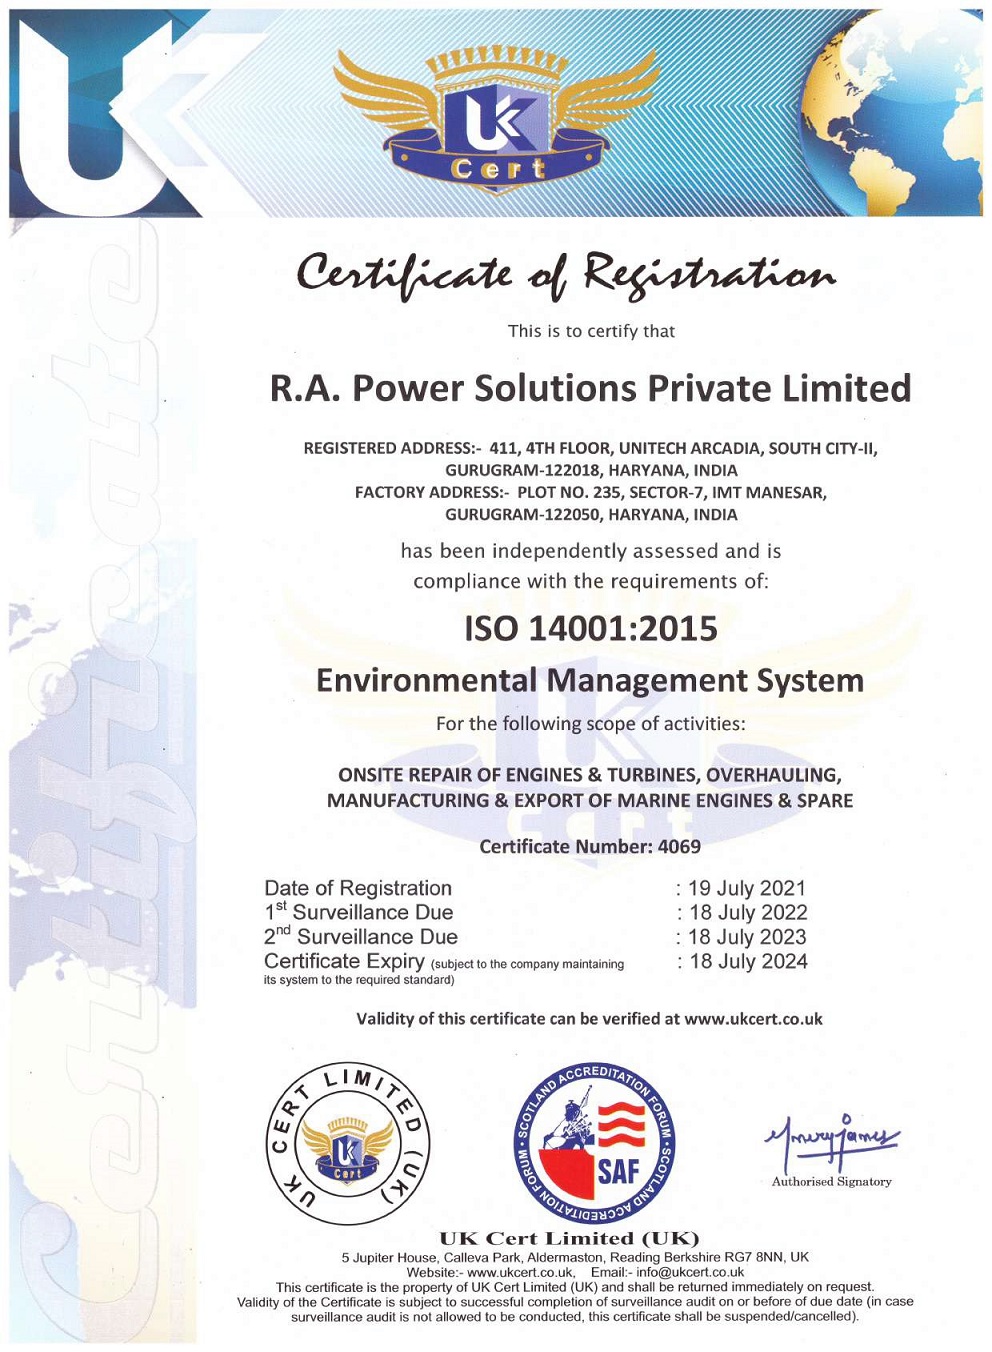 RA Power Solutions